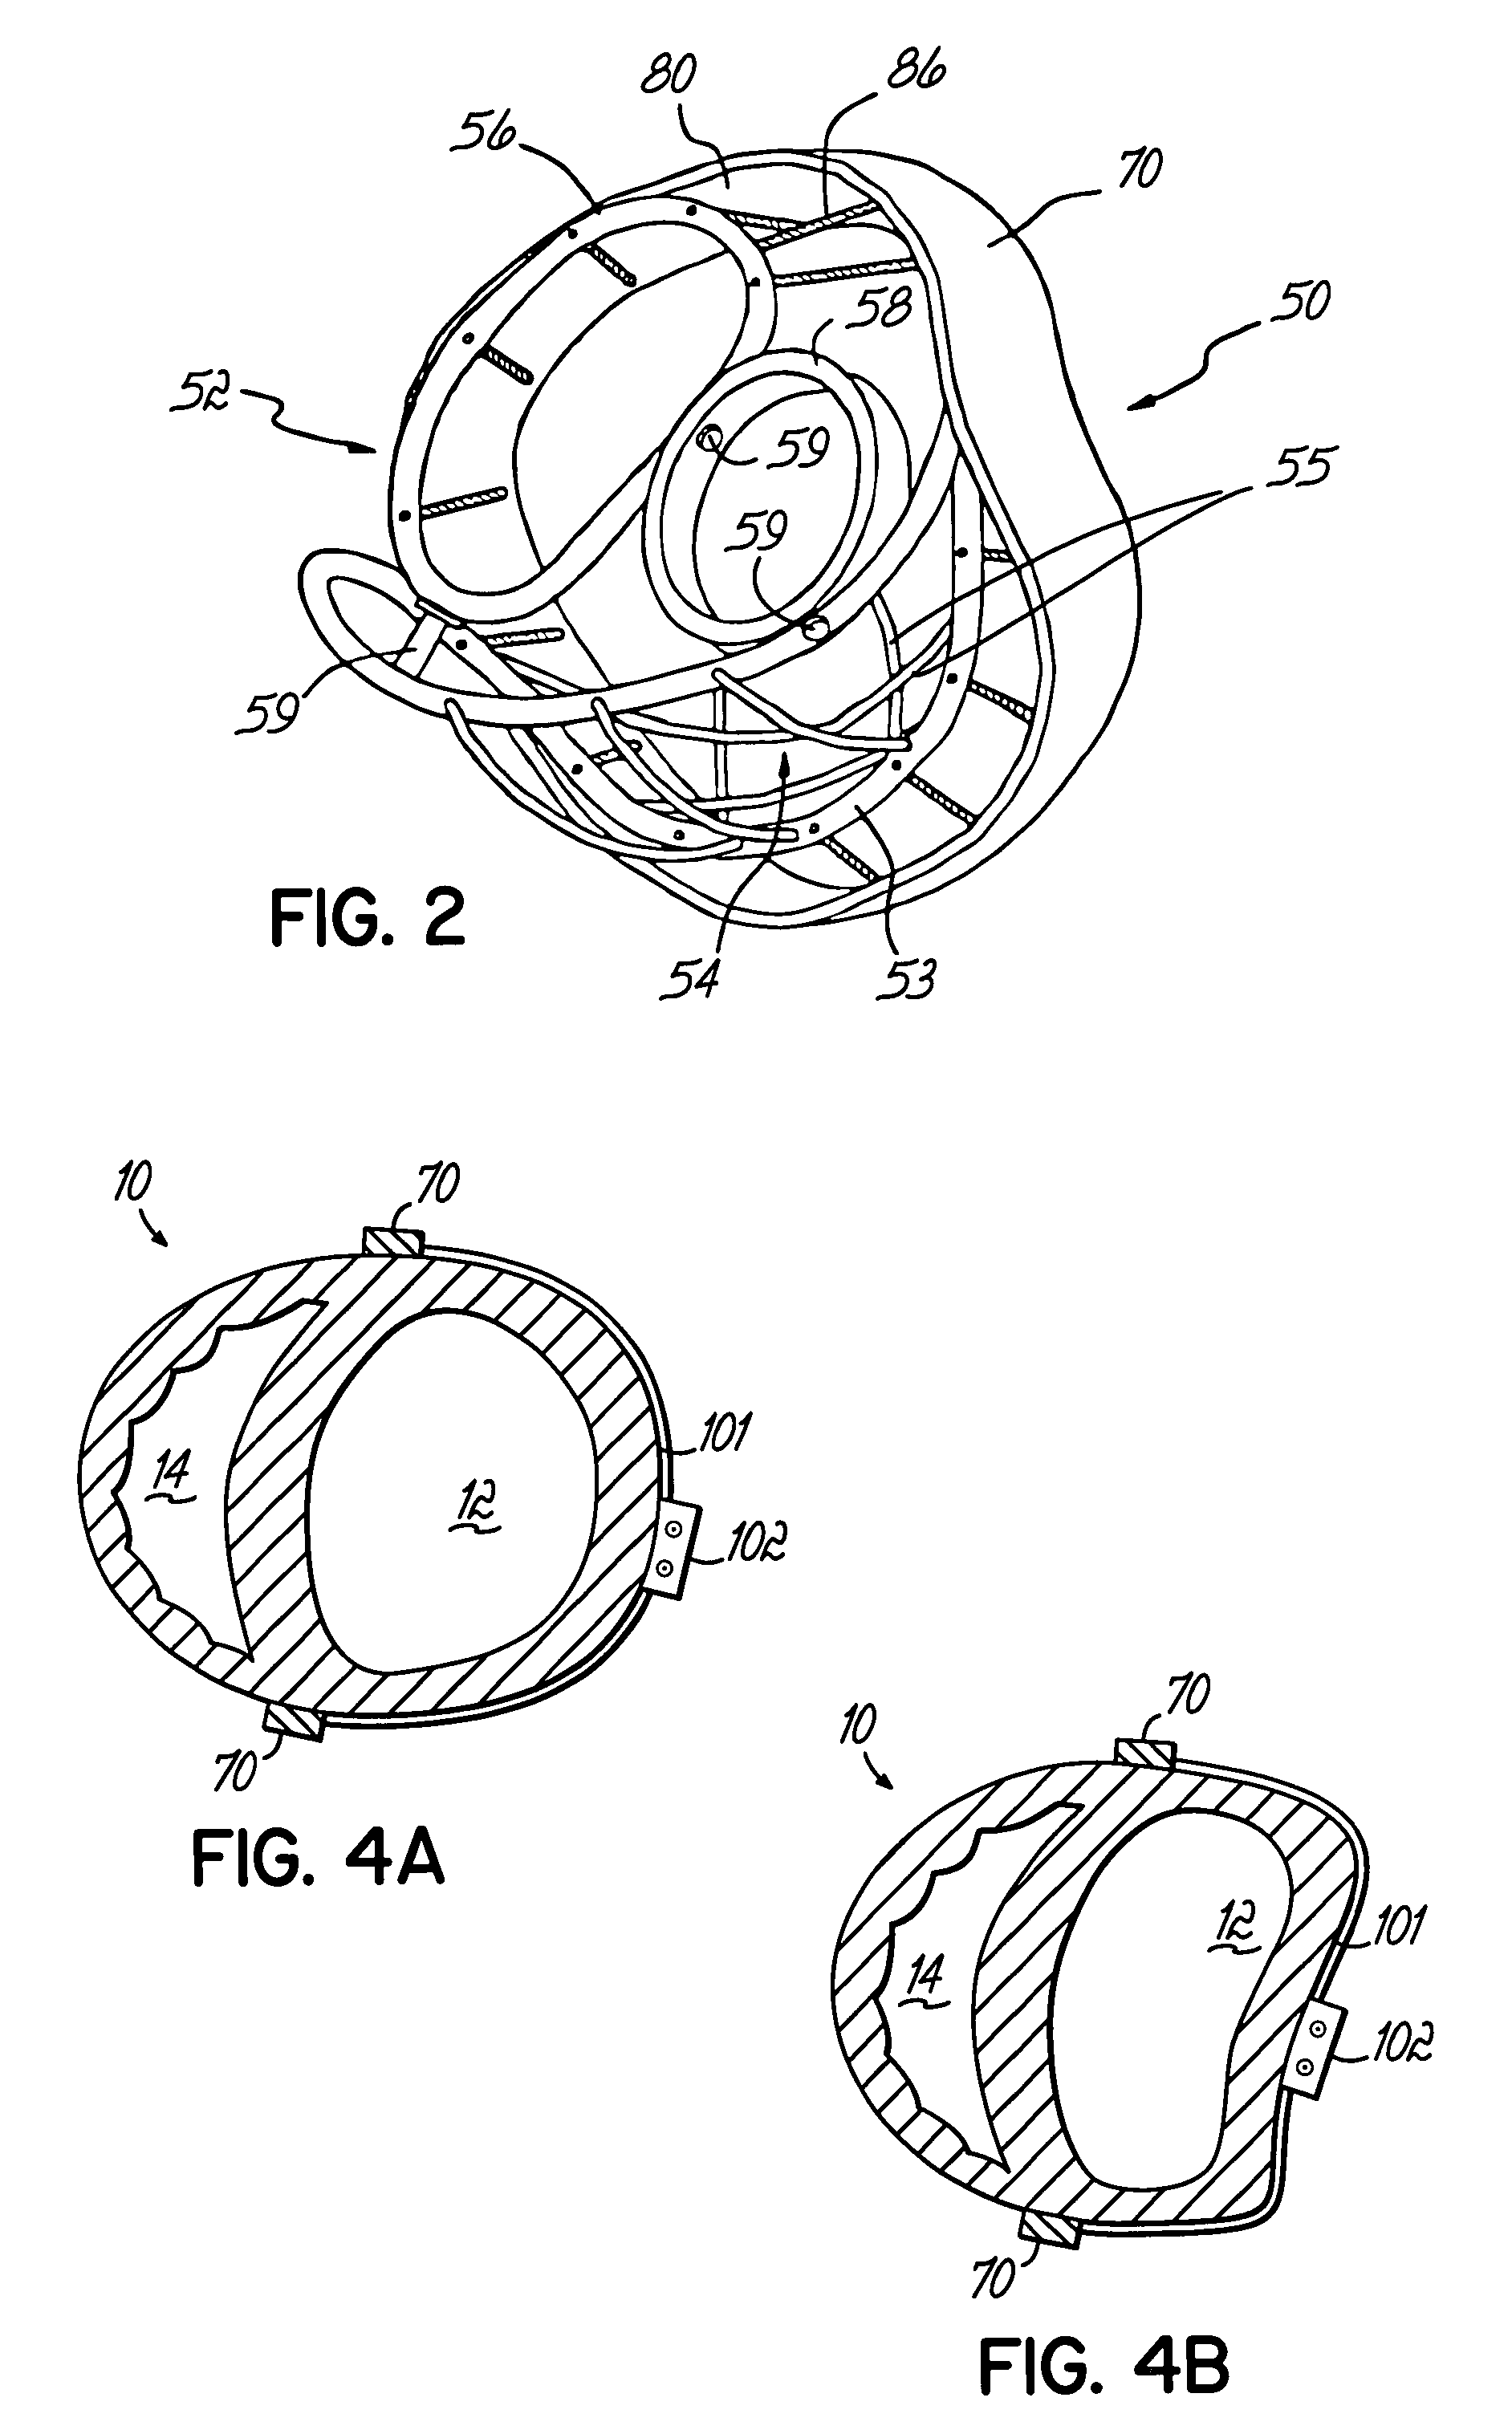 Heart wall actuation device for the natural heart